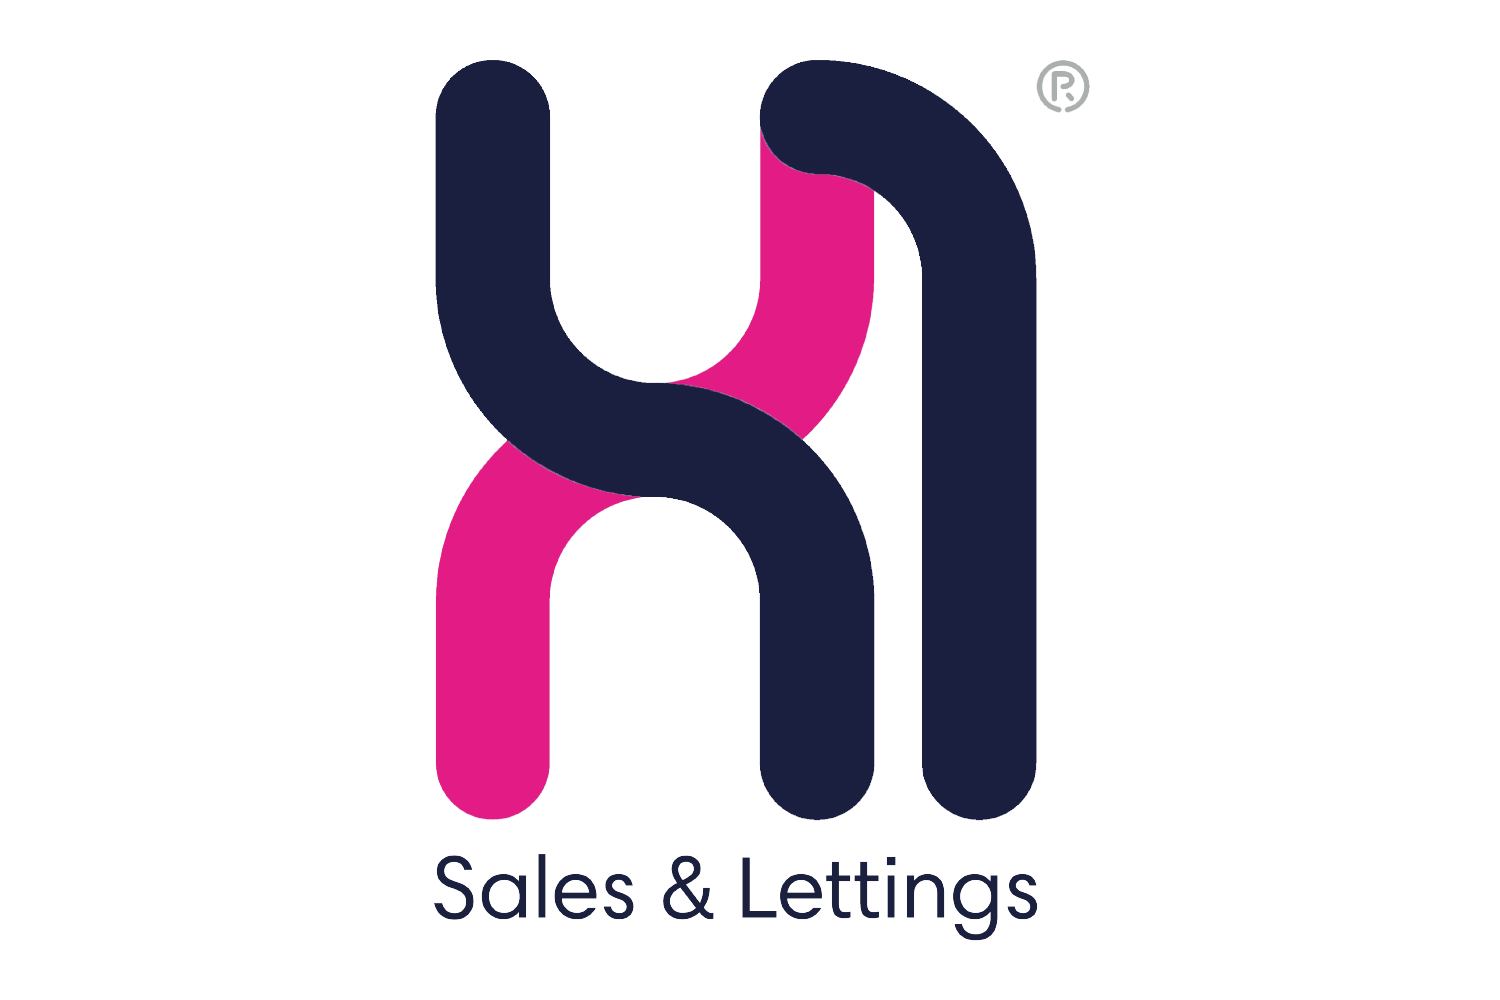 'X1 Sales and Lettings